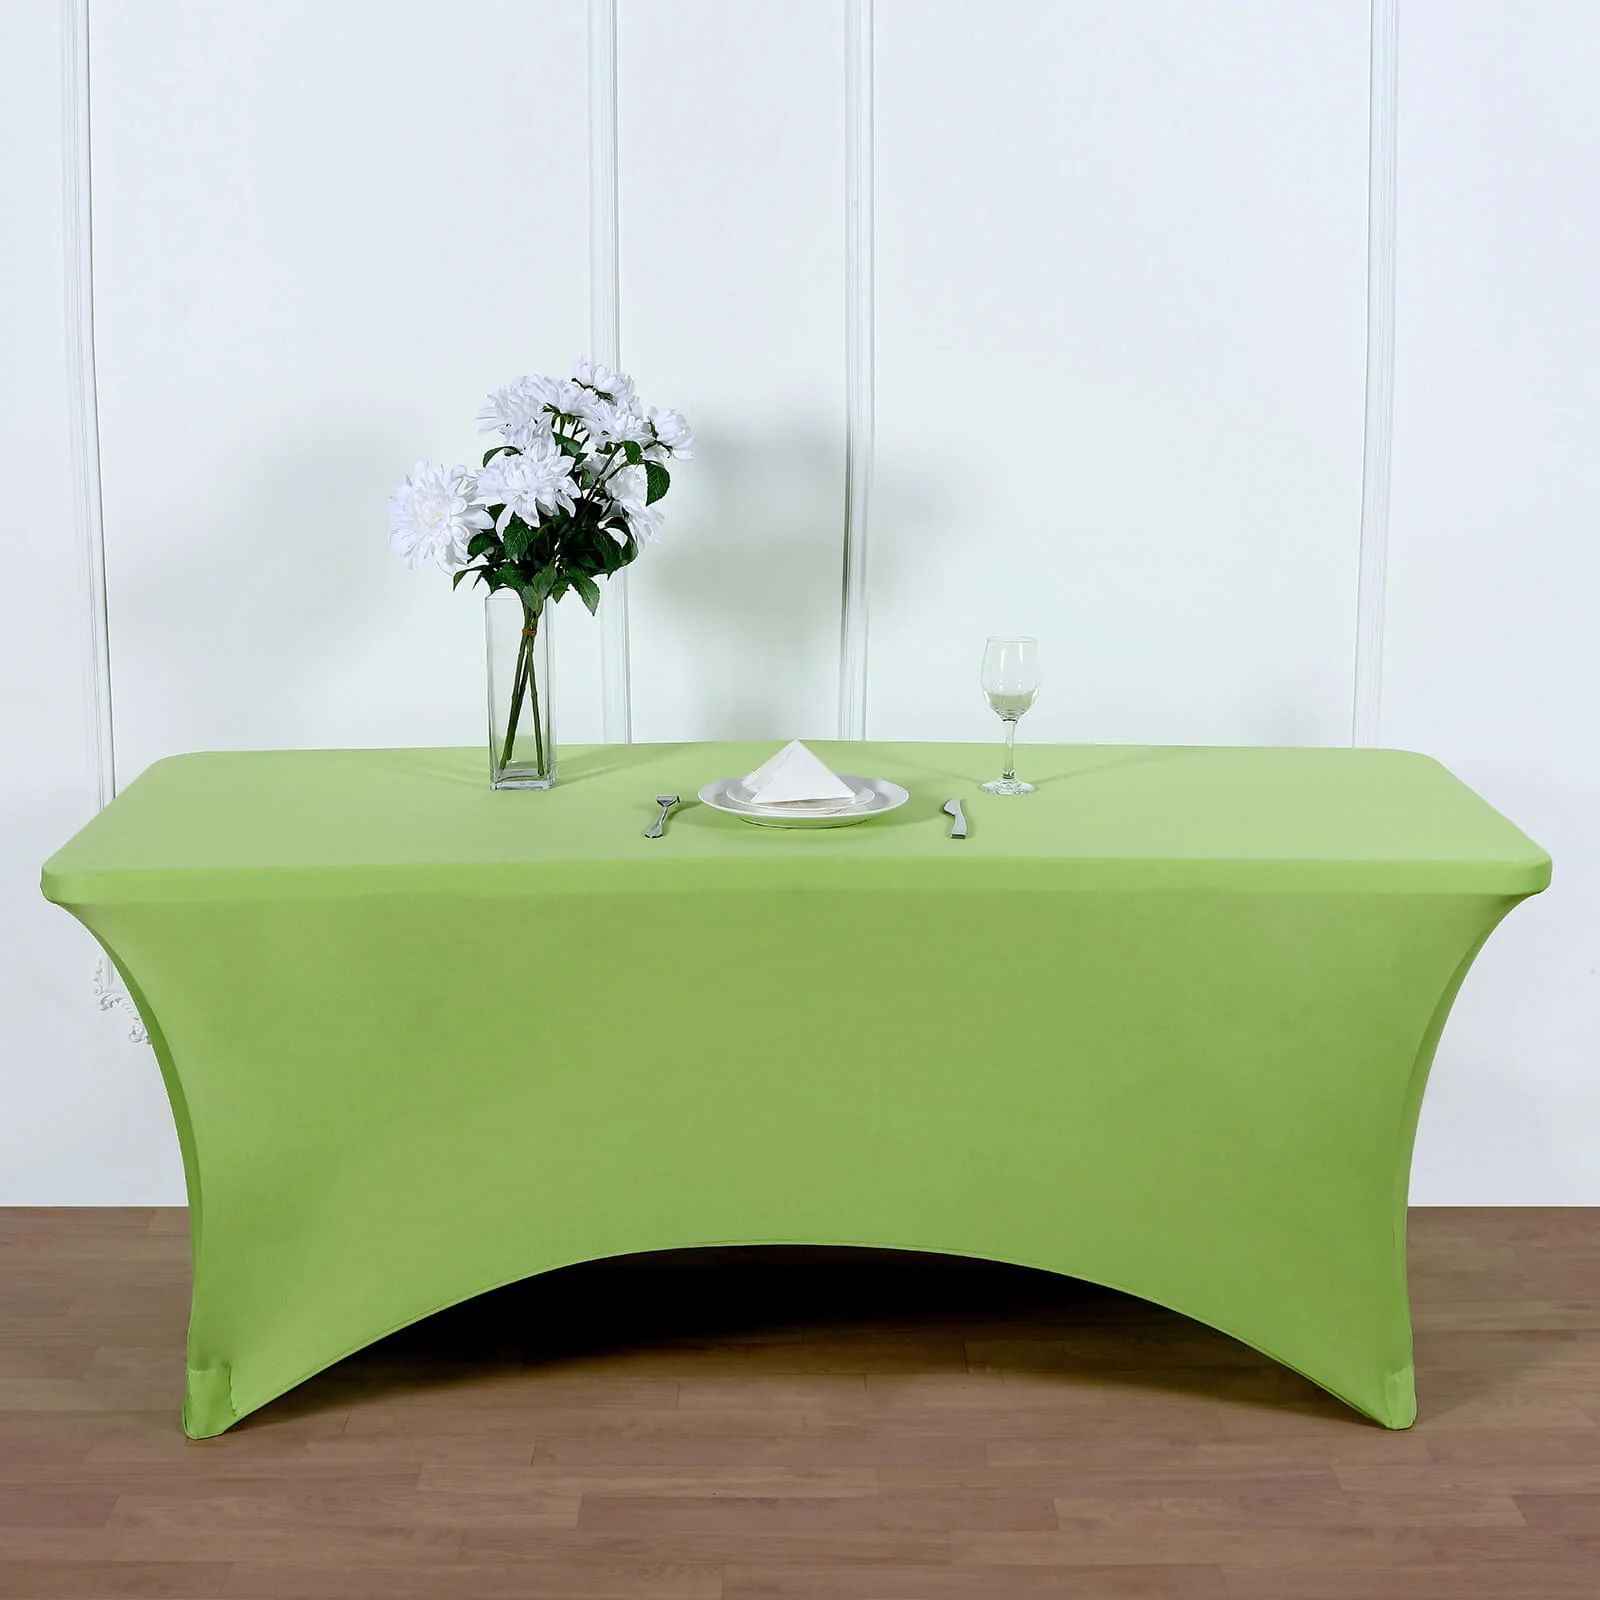 Apple Green - 6 Ft Rectangular Spandex Table Cover Wedding Party - $33.88